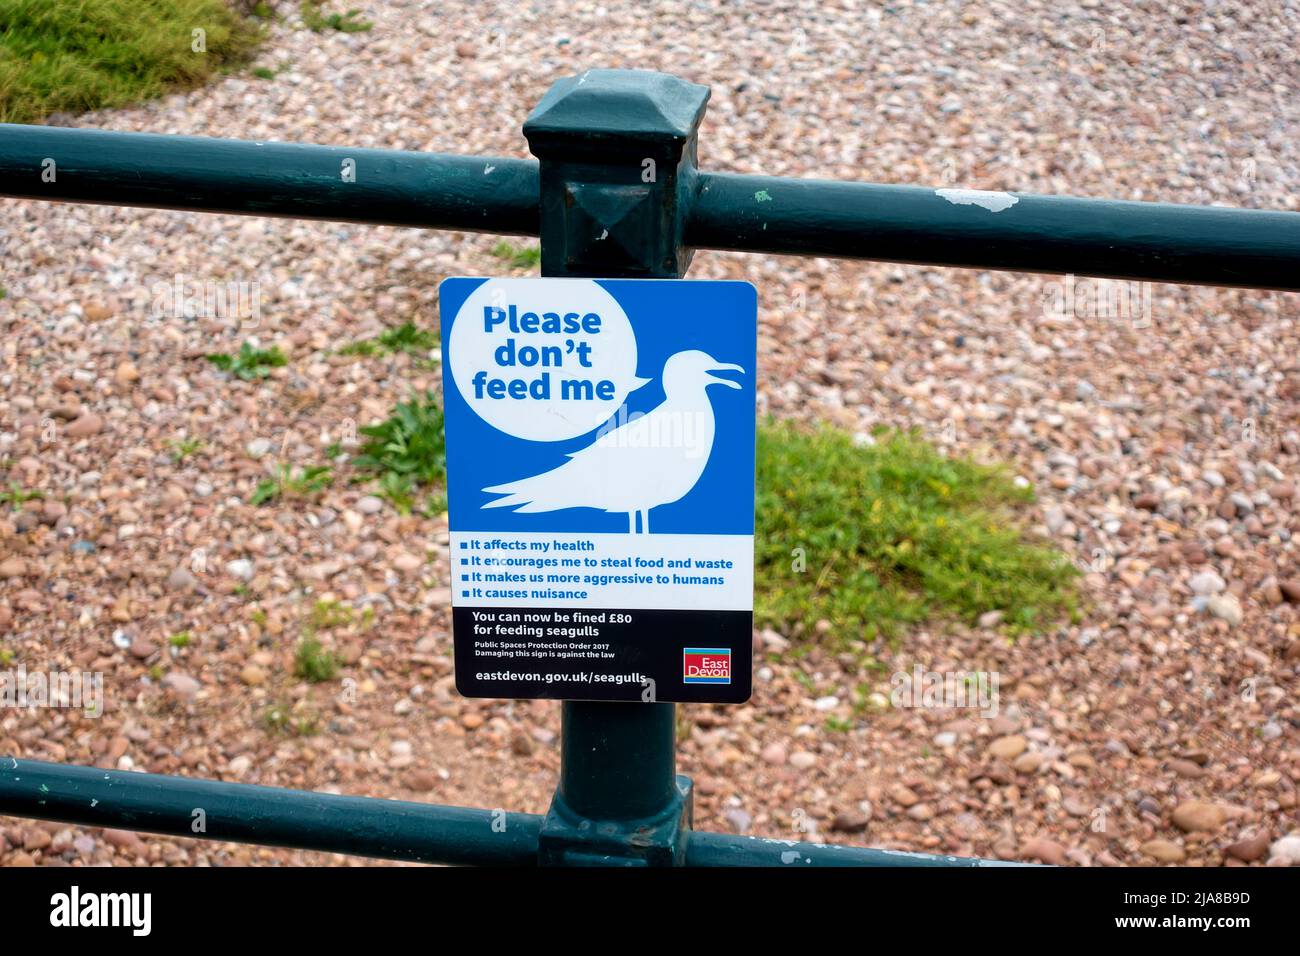 Sidmouth, Devon, UK - Agosto 8 2018: A Please Do't Feed Me Seagull Sign at Sidmouth in Devon, England, UK Foto Stock